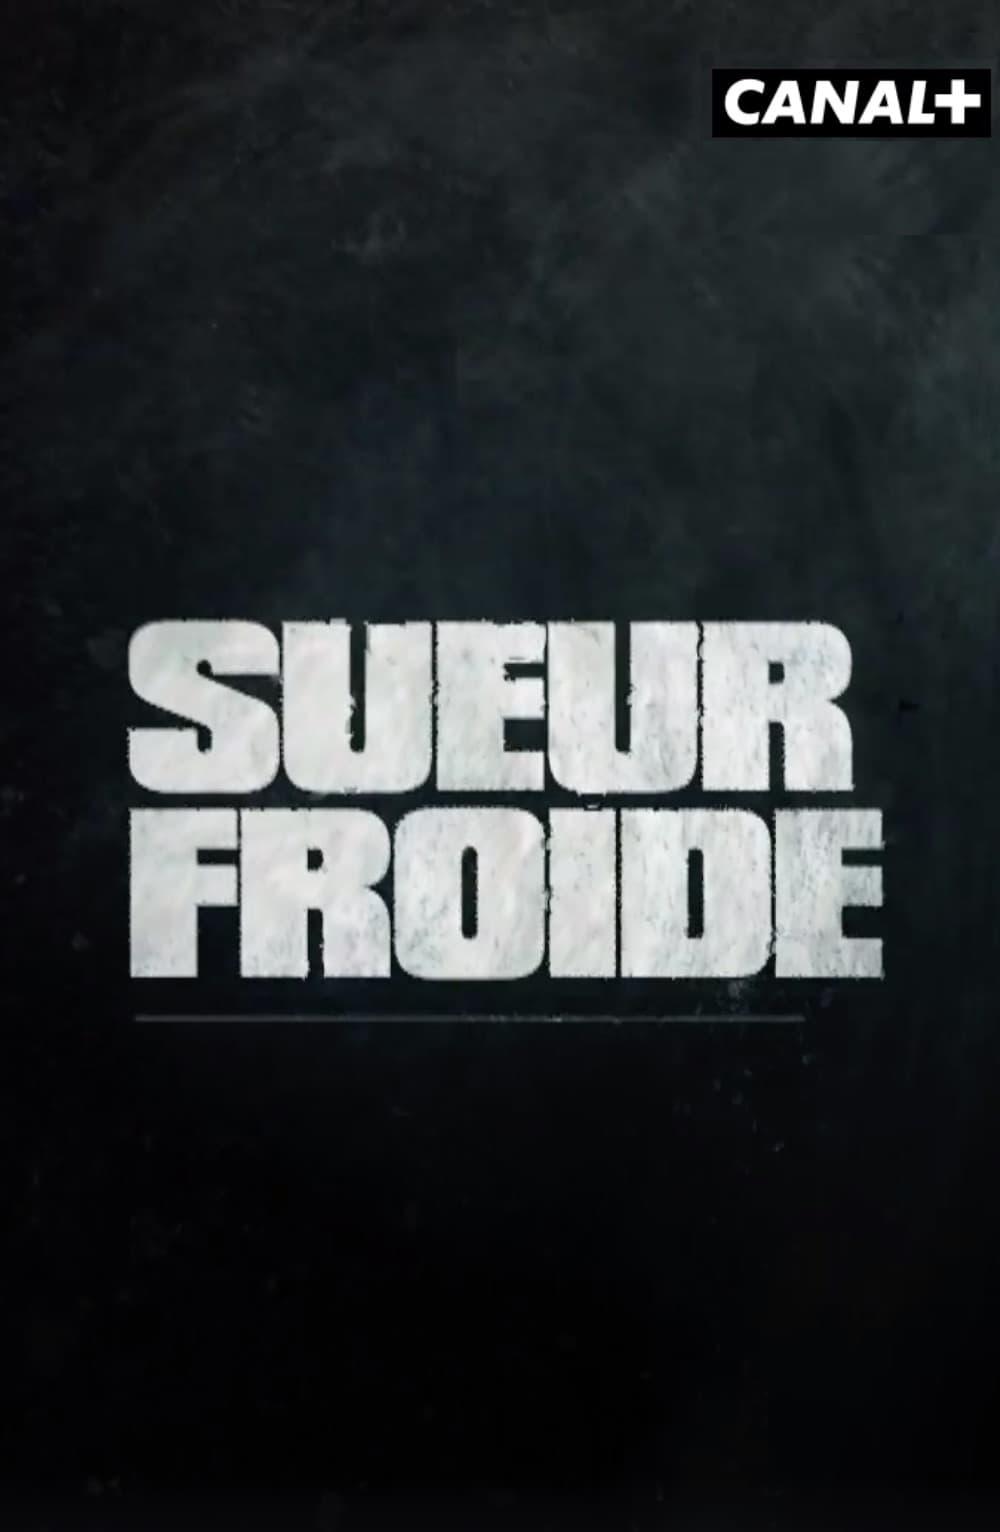 Sueur froide poster